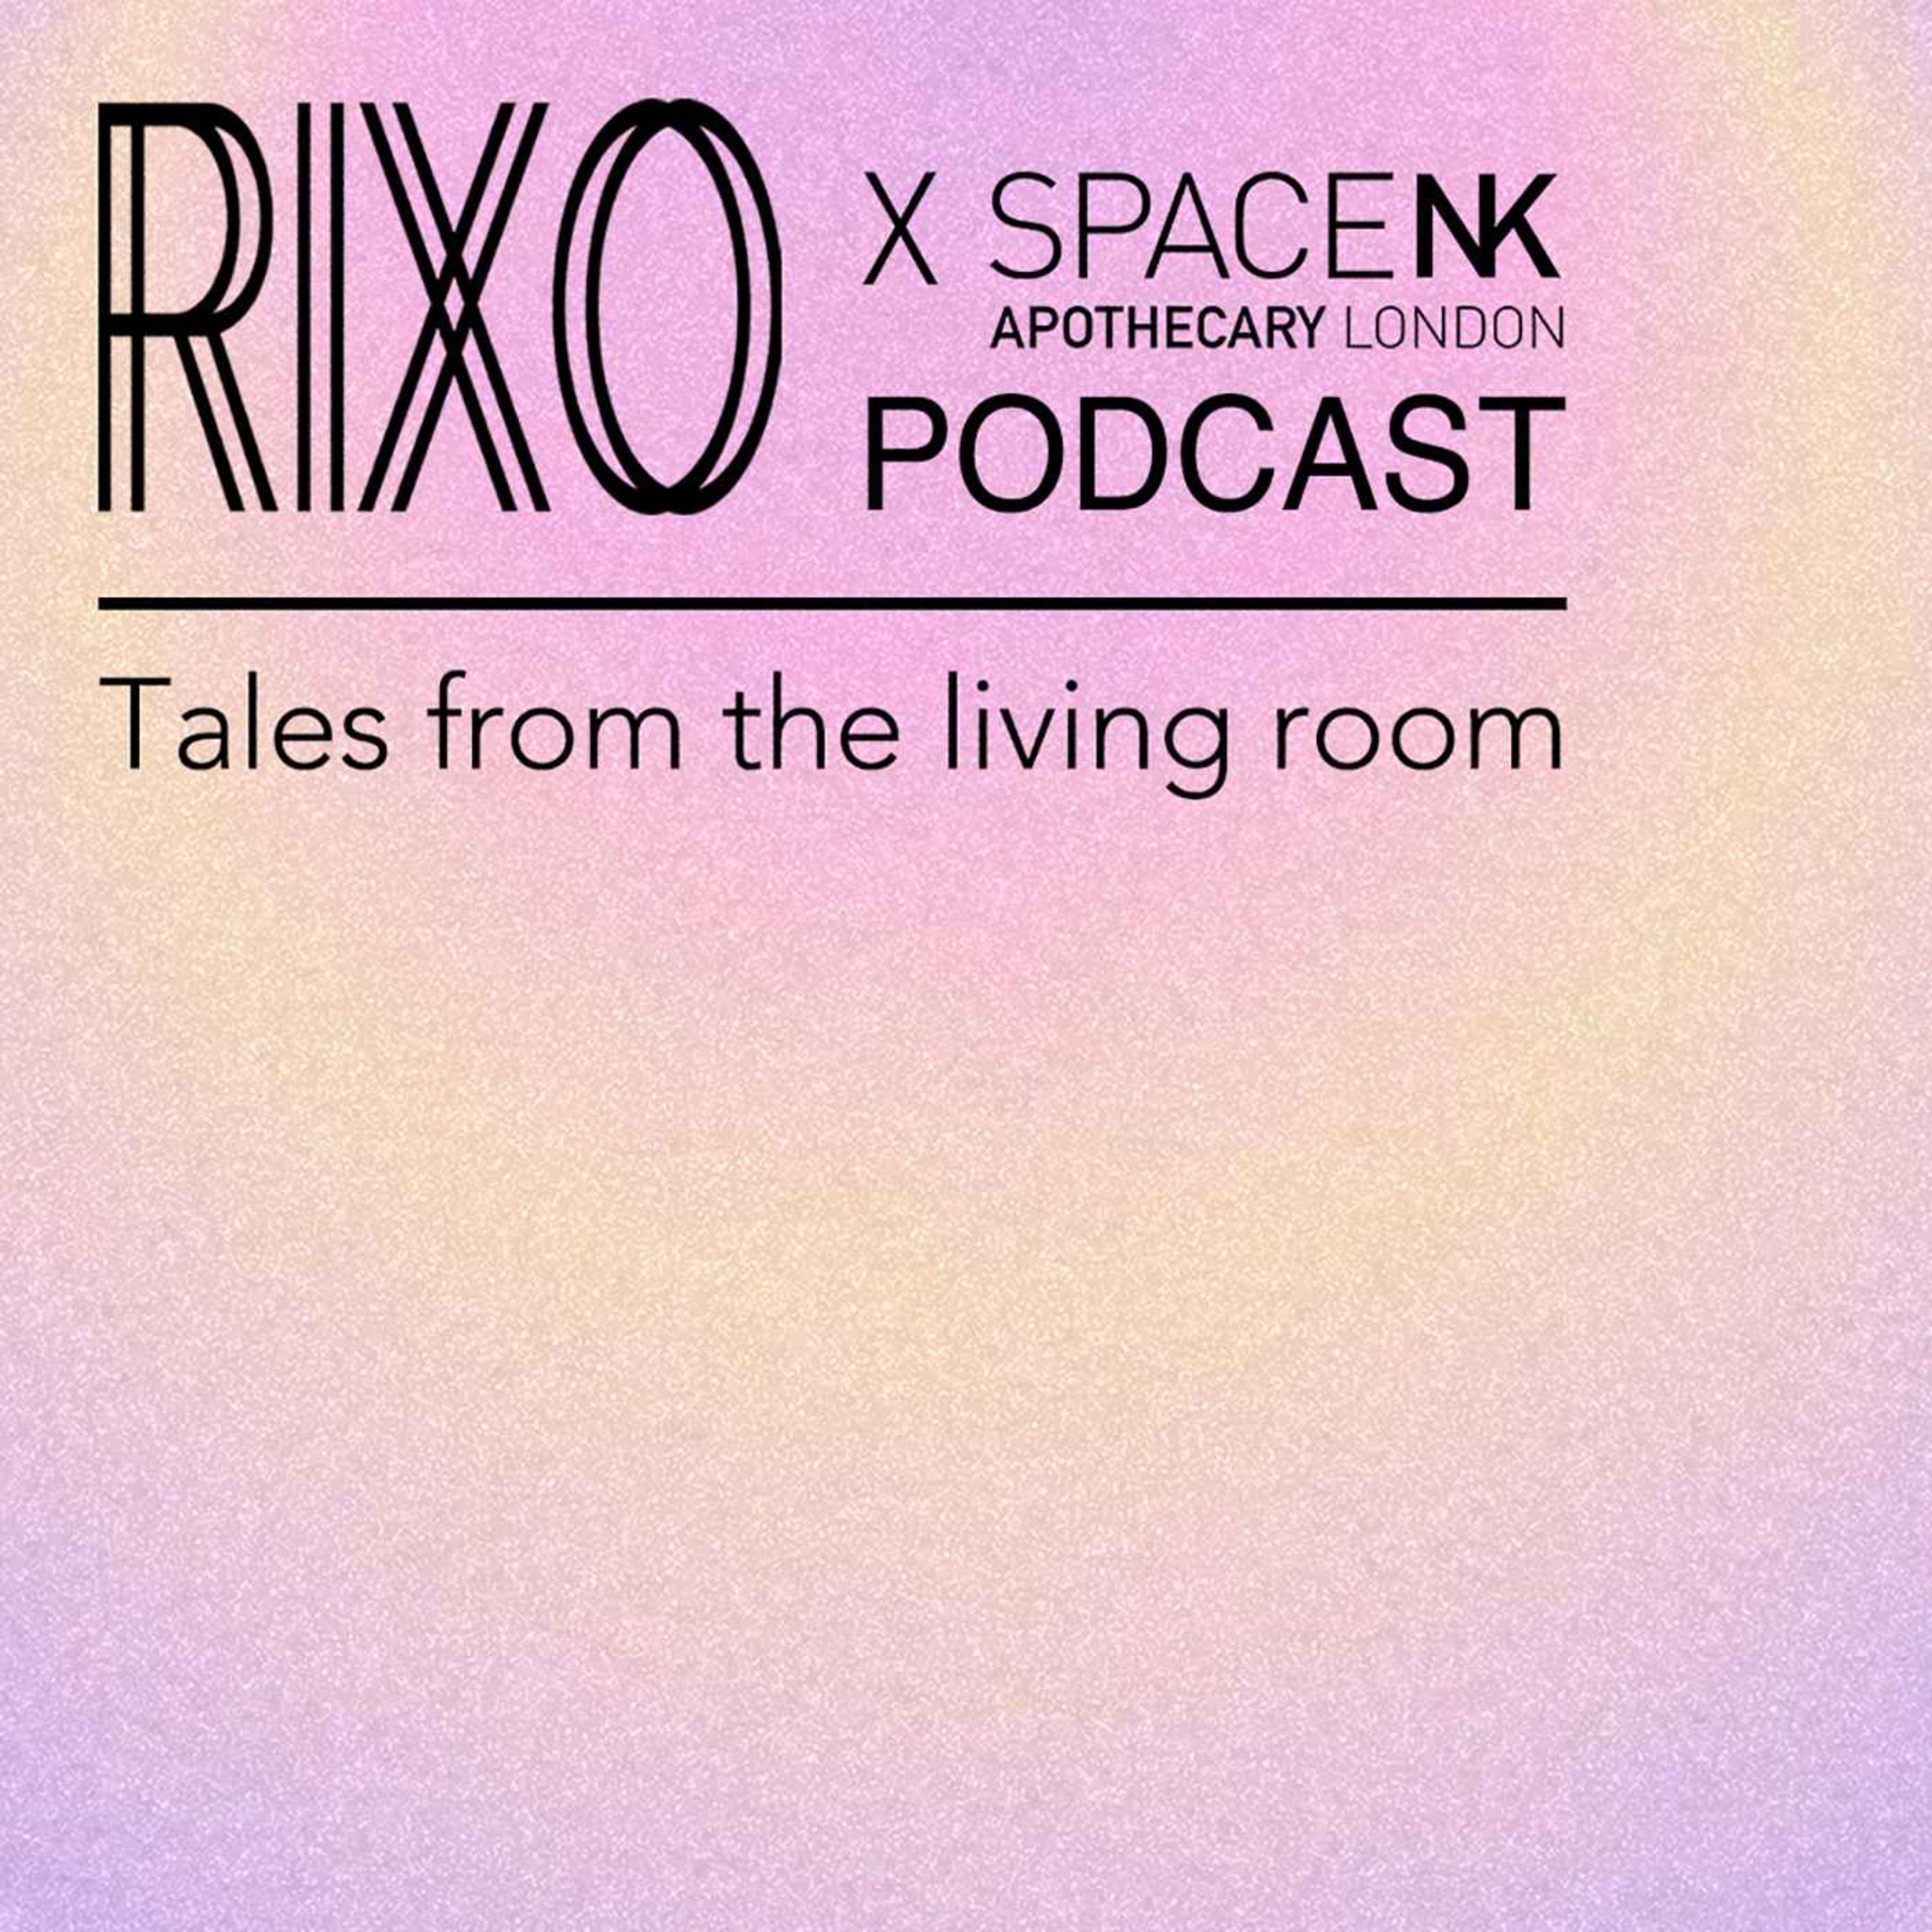 RIXO Tales from the Living Room